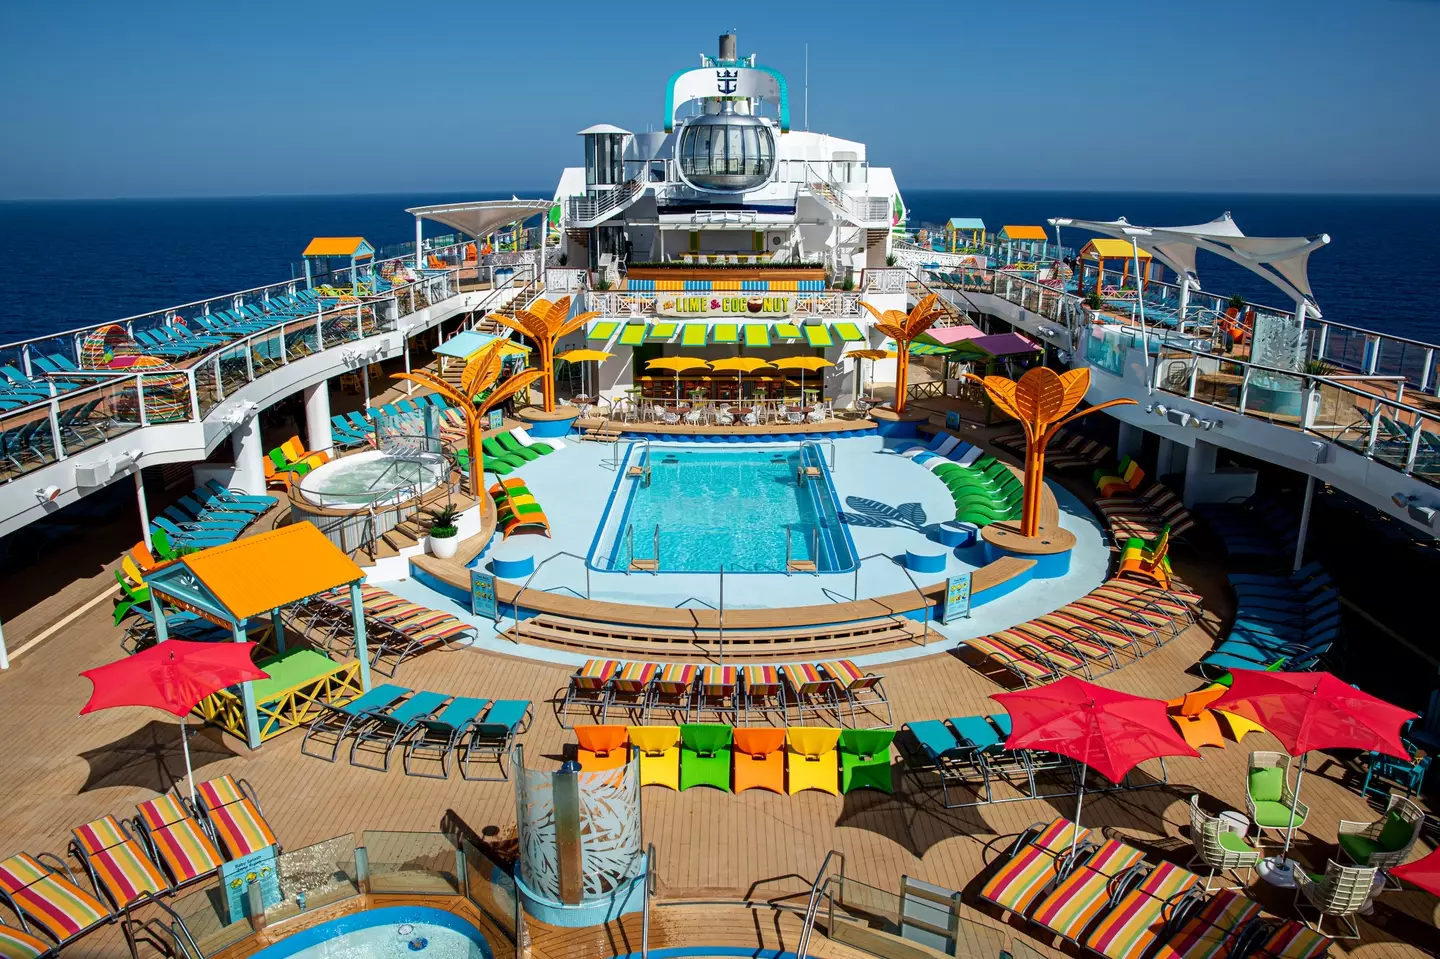 The top deck pool.